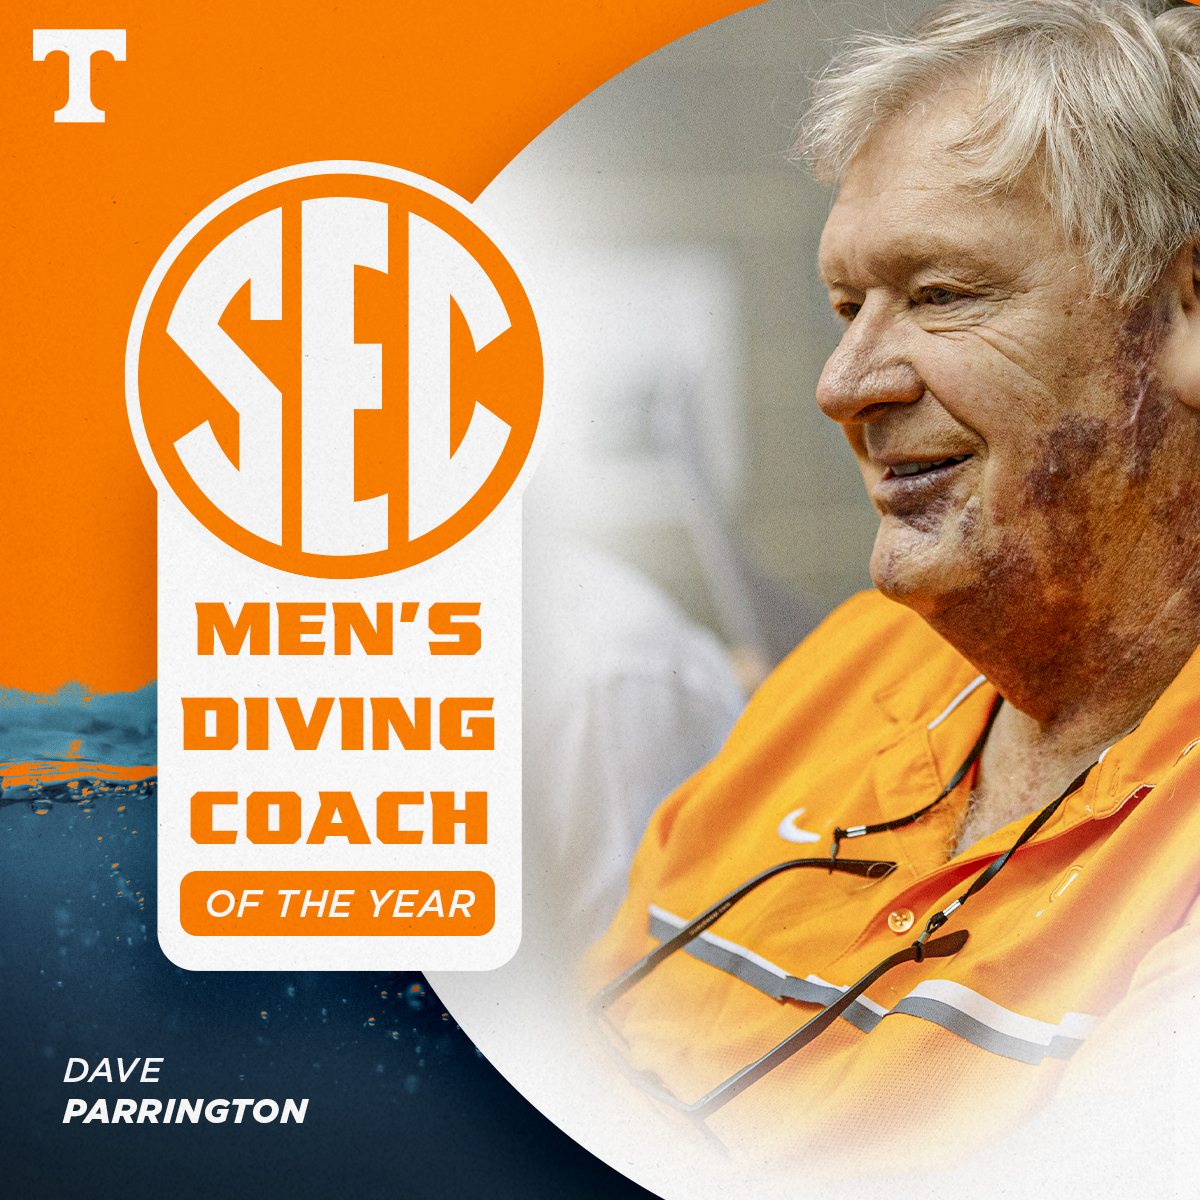 For the 12th time during his decorated career, Dave Parrington is the SEC Men's Diving Coach of the Year! Dave has won the honor more times than any other coach in league history, and he boasts more than the rest of the active conference coaches combined! 🐐